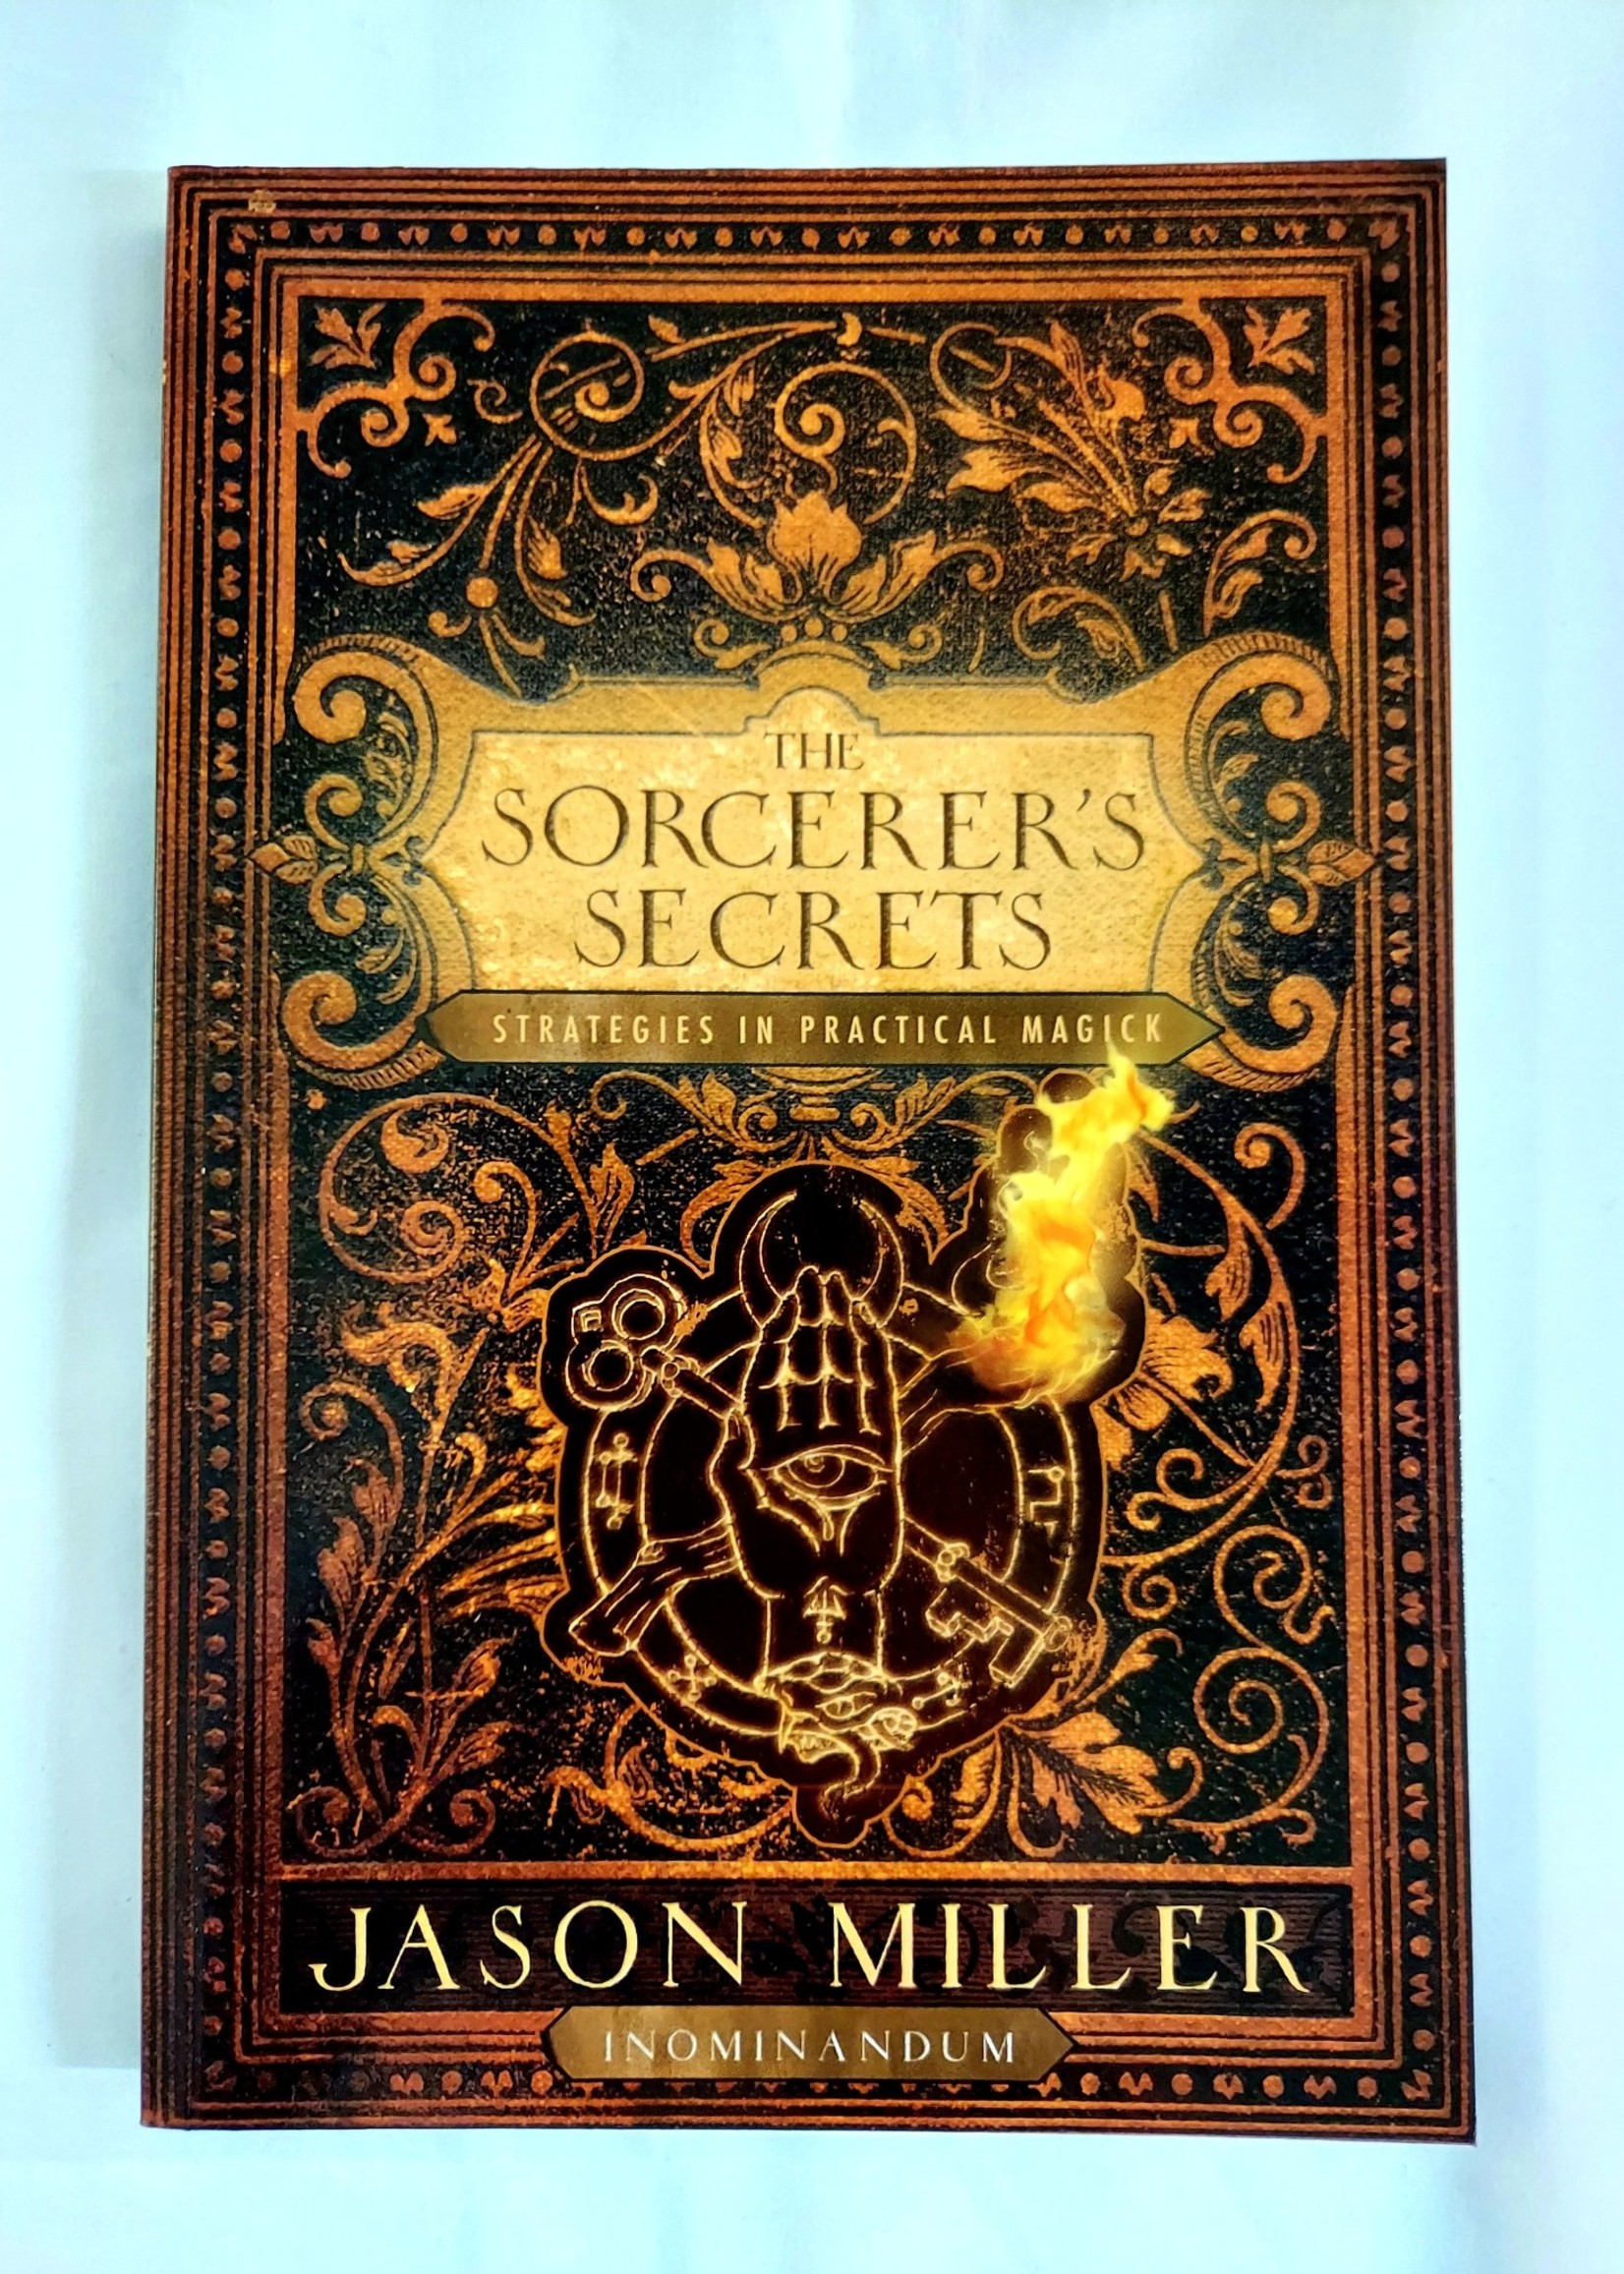 The Sorcerer's Secrets Strategies in Practical Magick -by Jason Miller